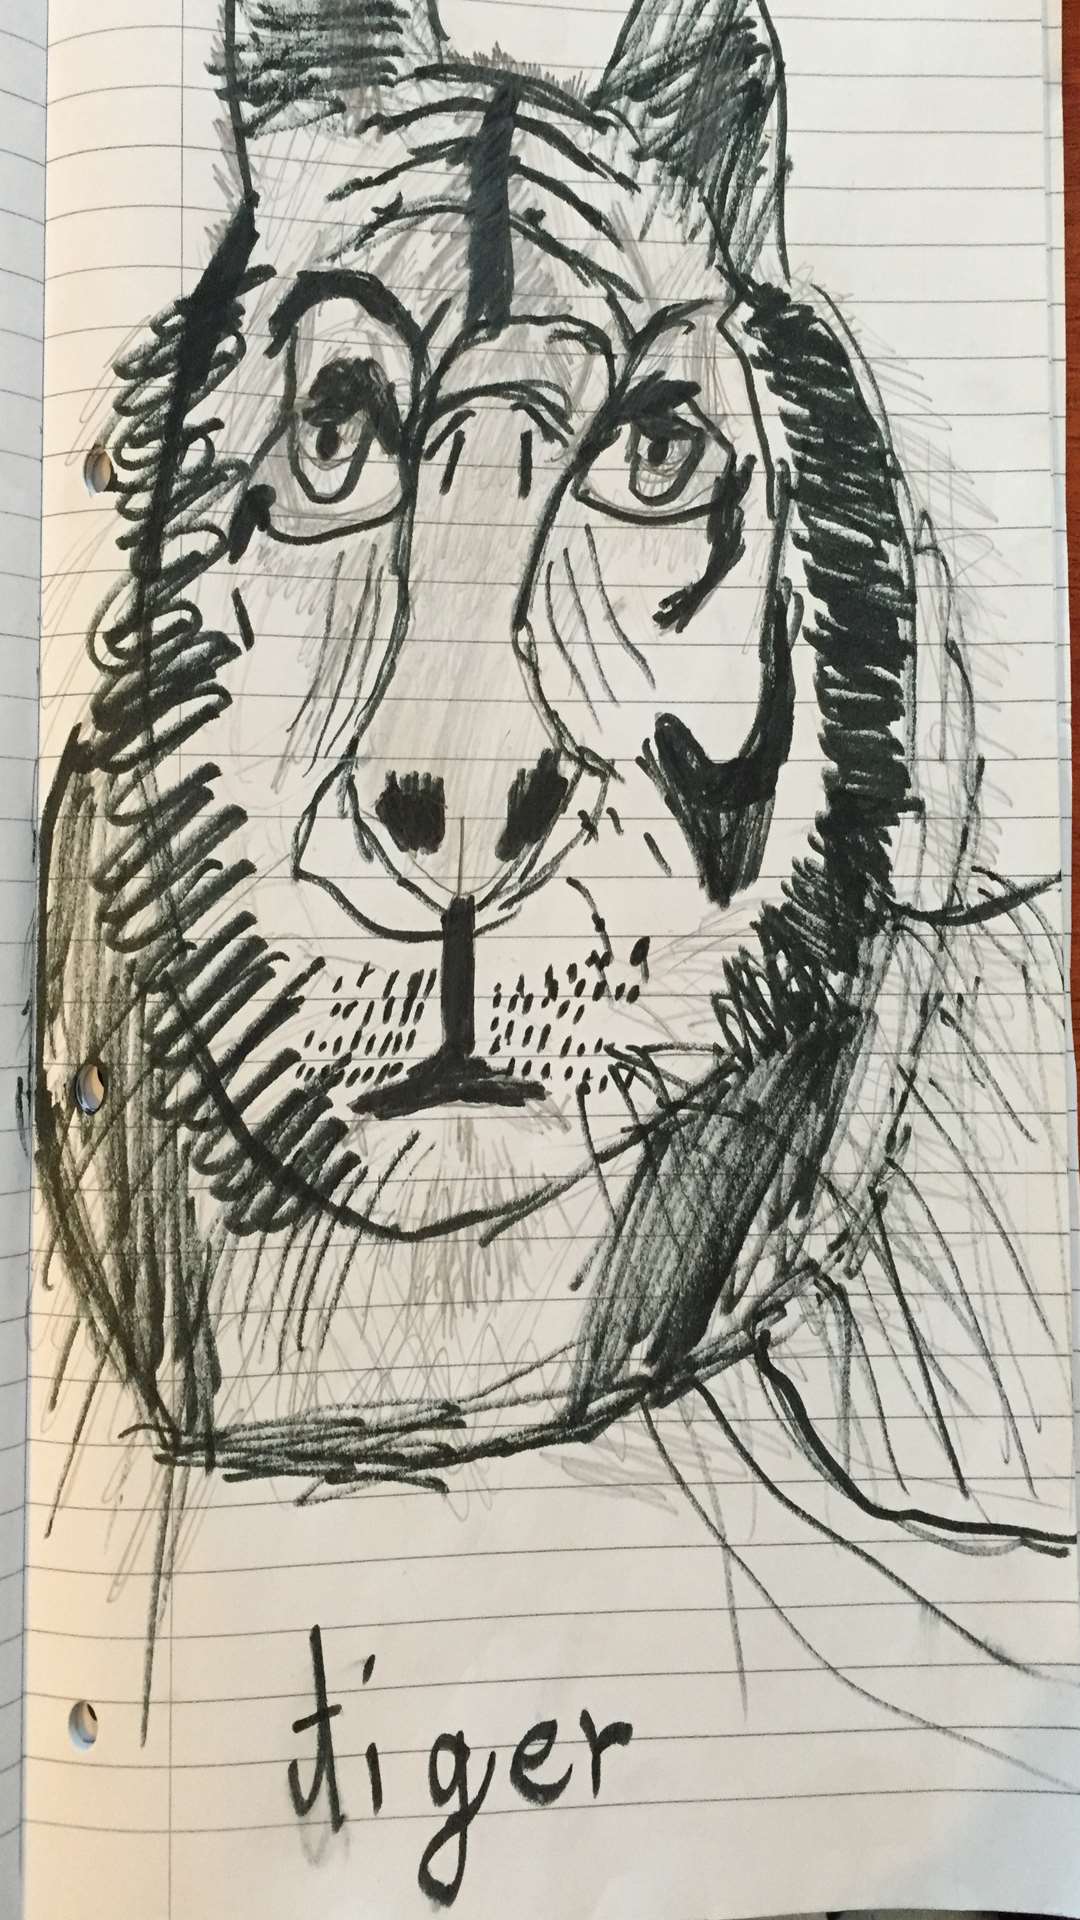 Michael's picture of a tiger